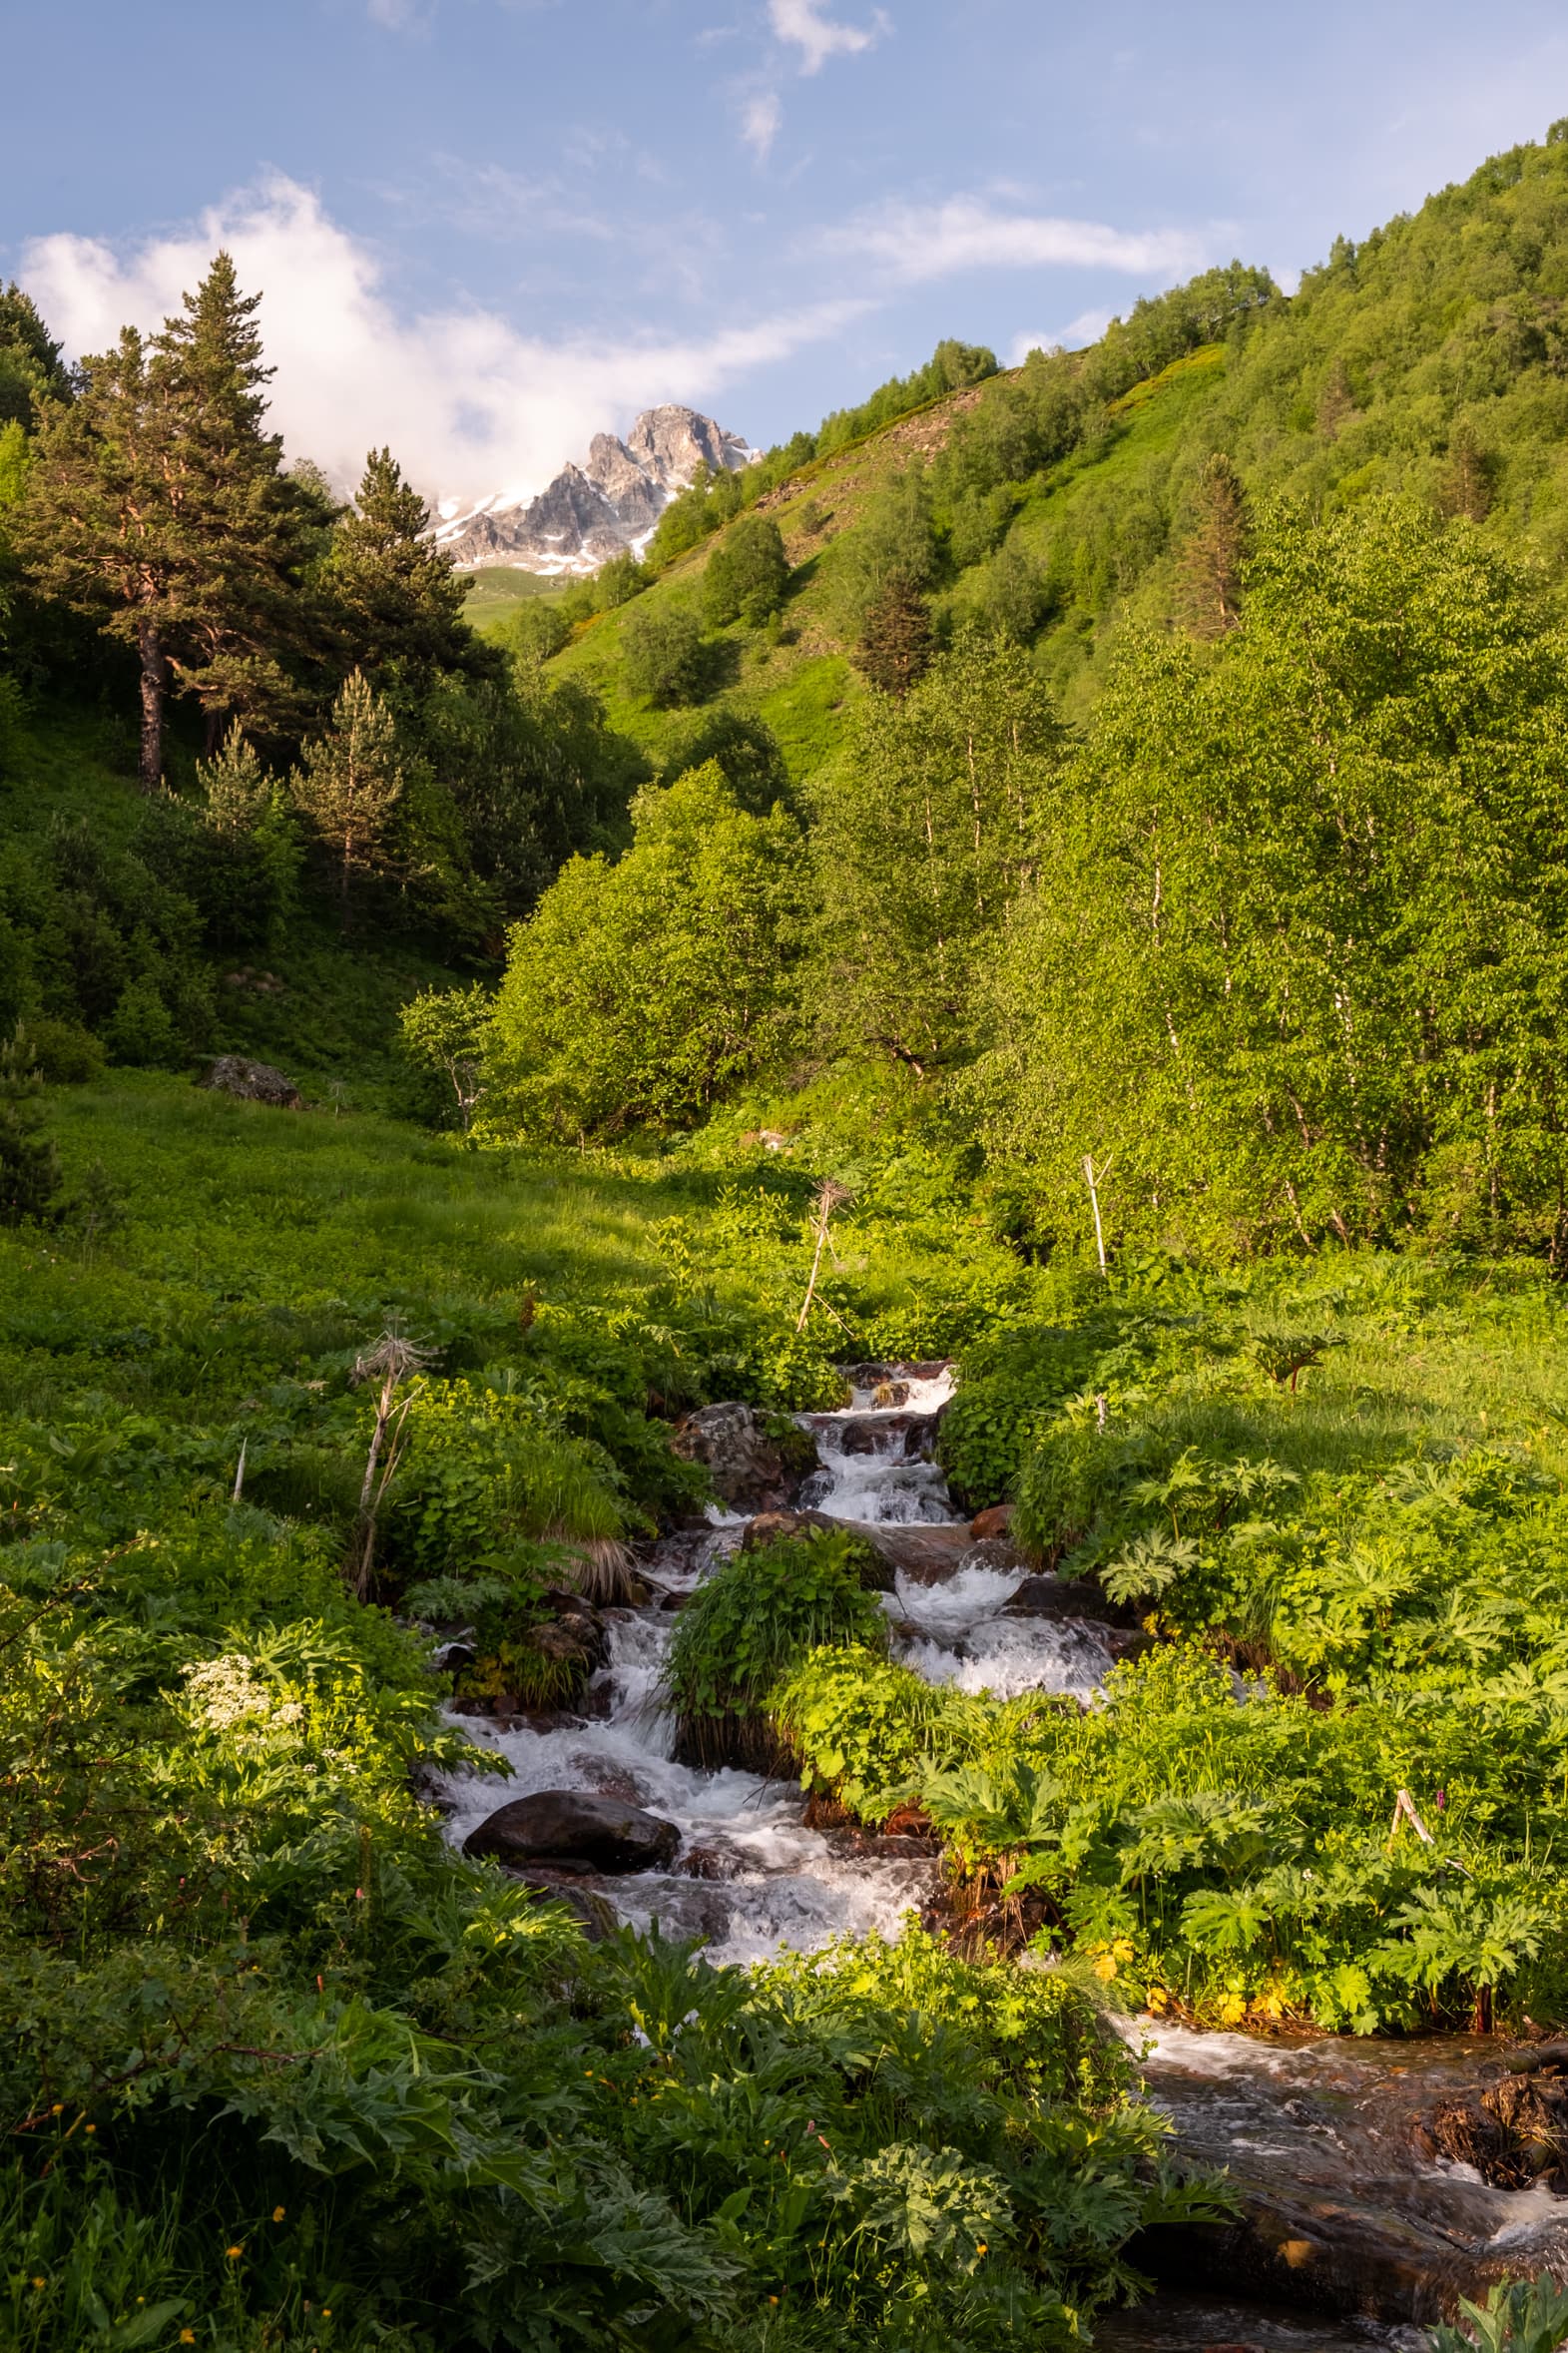 A romantic stream surrounded by greenery leading to a rocky peak in golden light